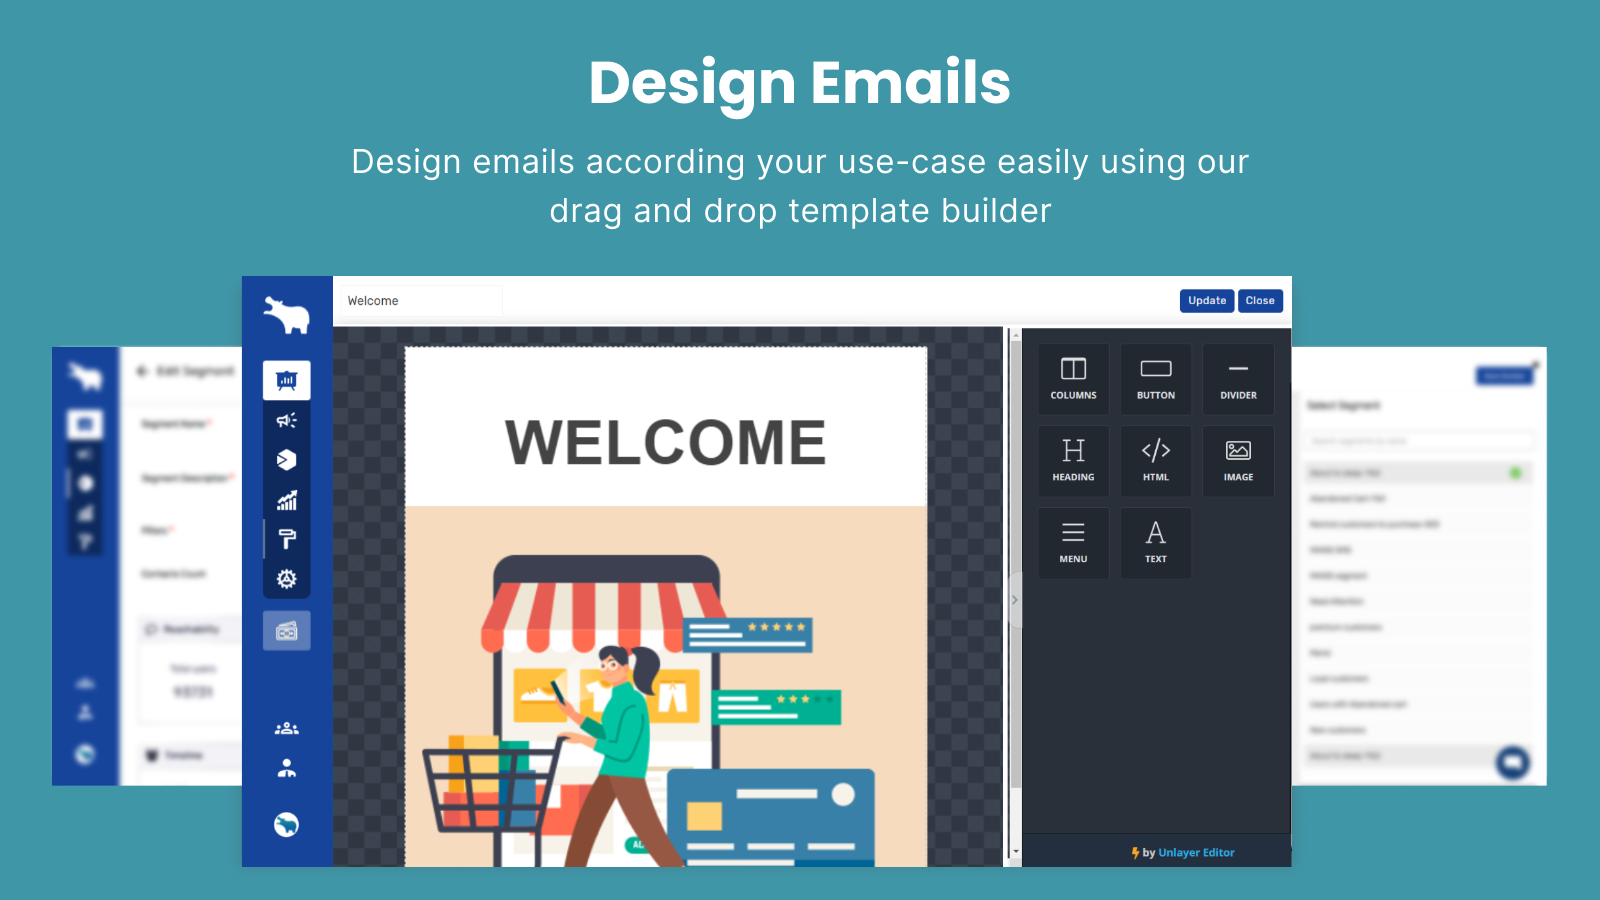 Design emails according your use-case using template builder